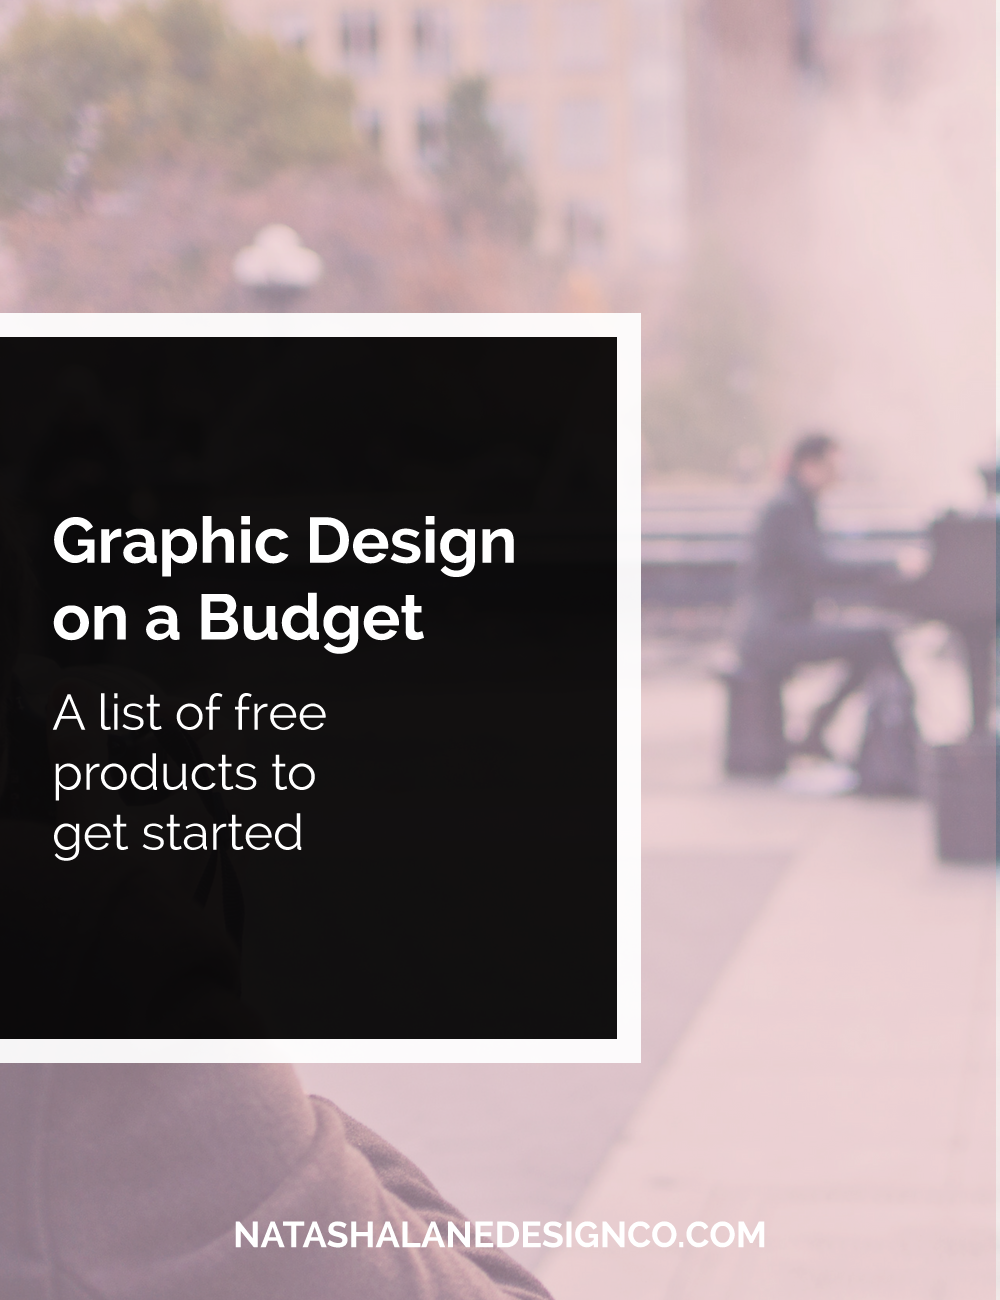 Graphic Design on a Budget: A list of free products to get started